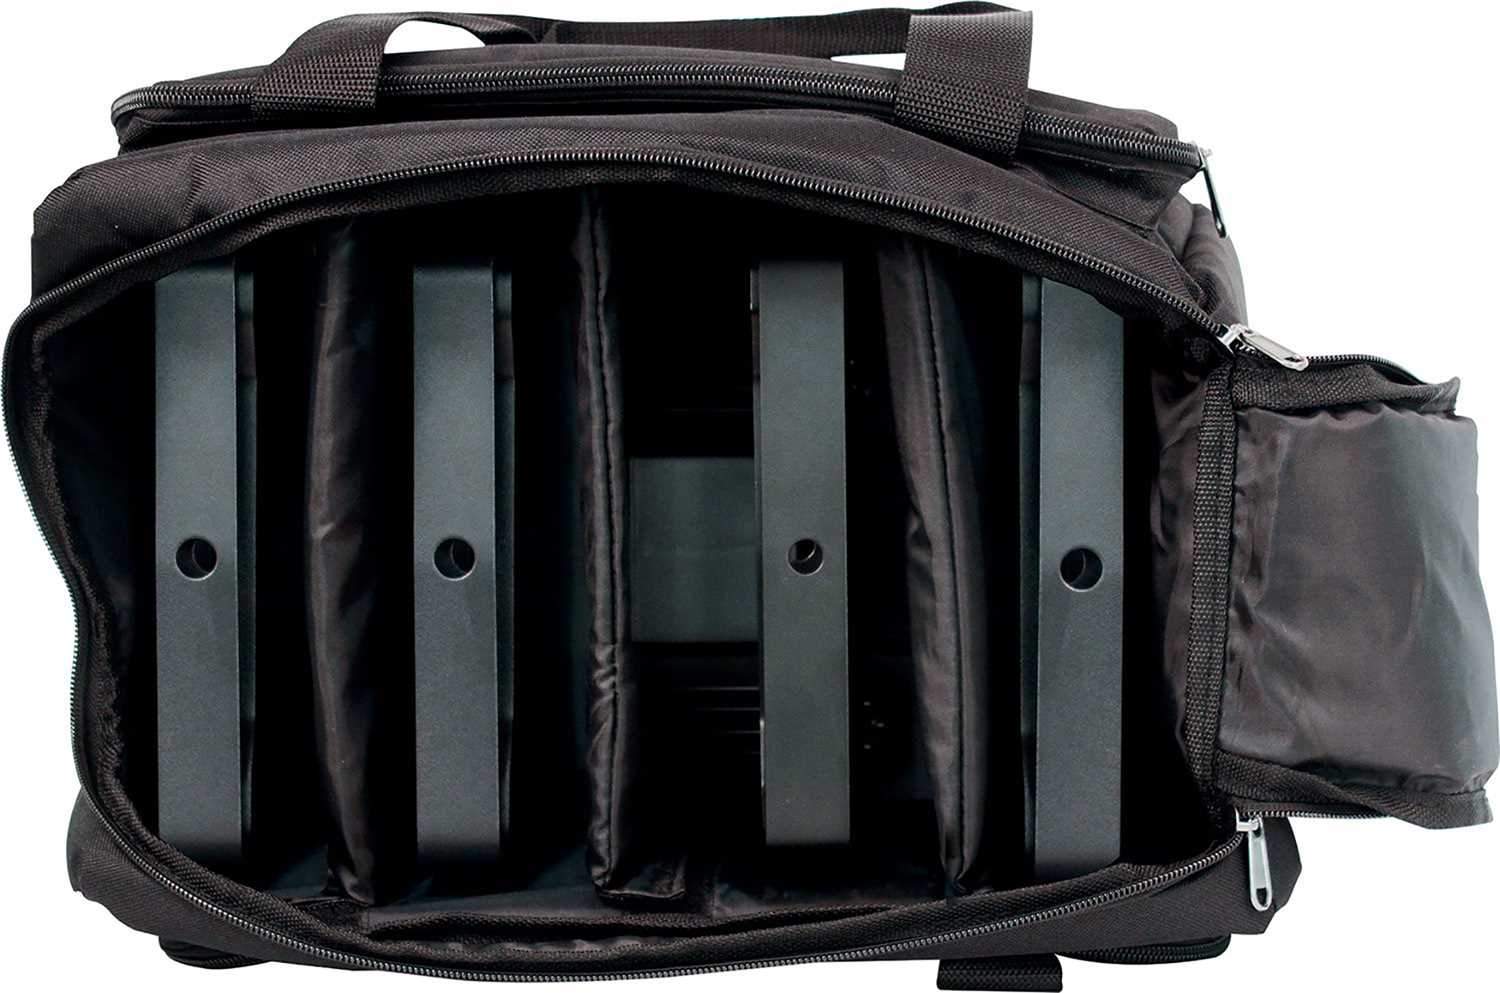 Solena Light Bag with Uplighting H-Frame Floor Stand 4-Pack - ProSound and Stage Lighting